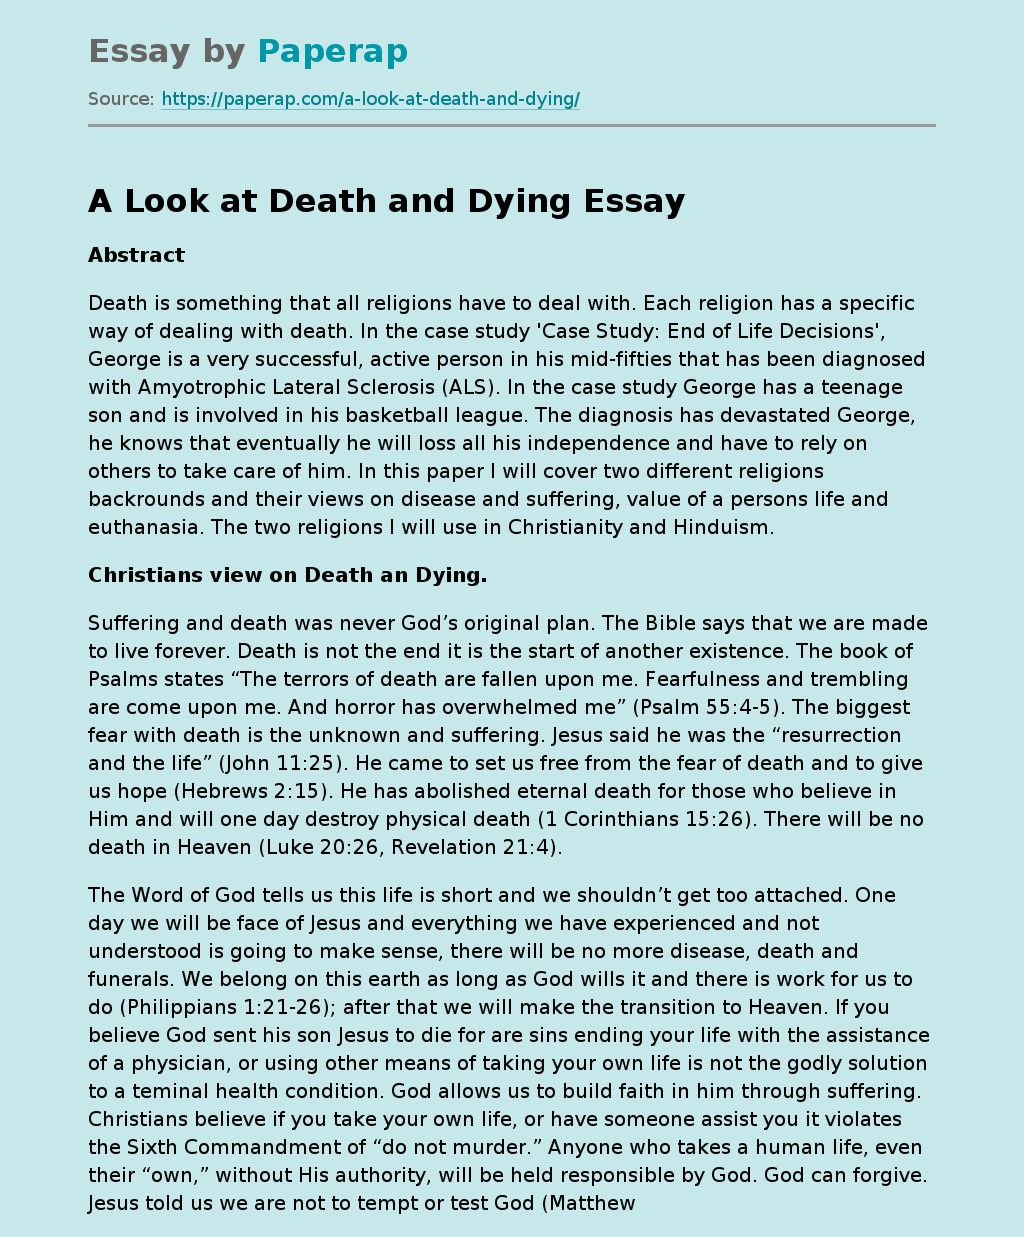 A Look at Death and Dying